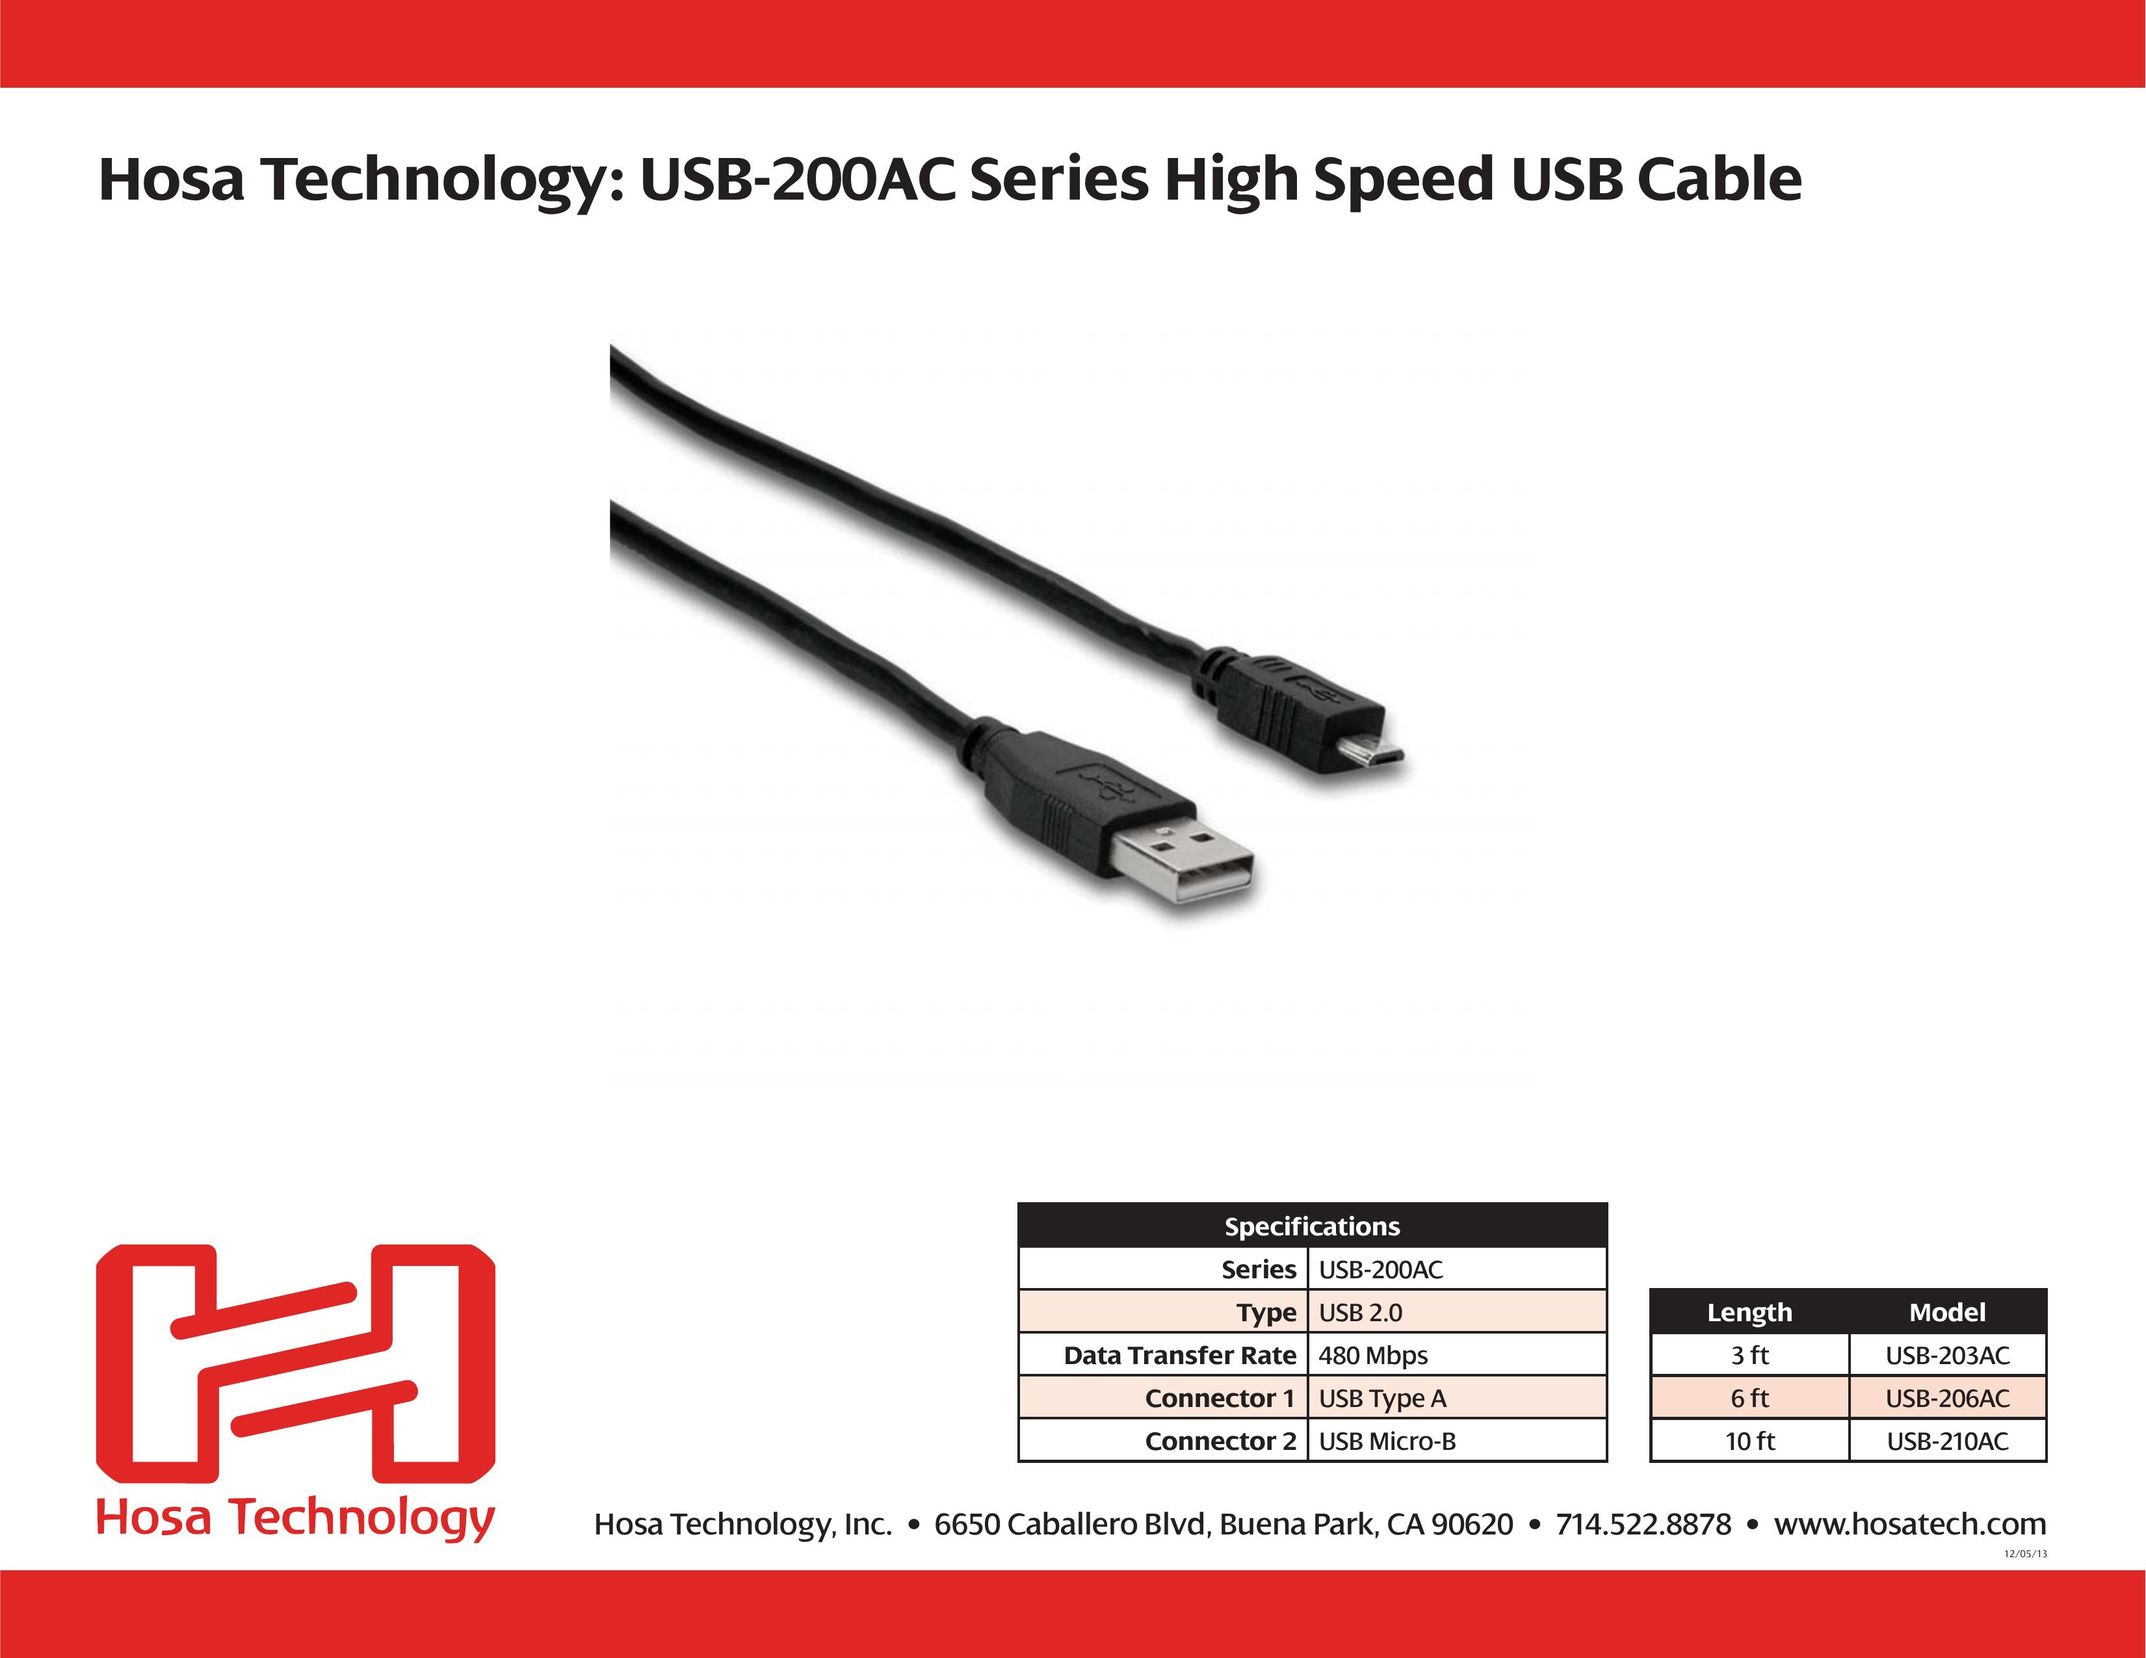 Hosa Technology USB-206AC Network Cables User Manual